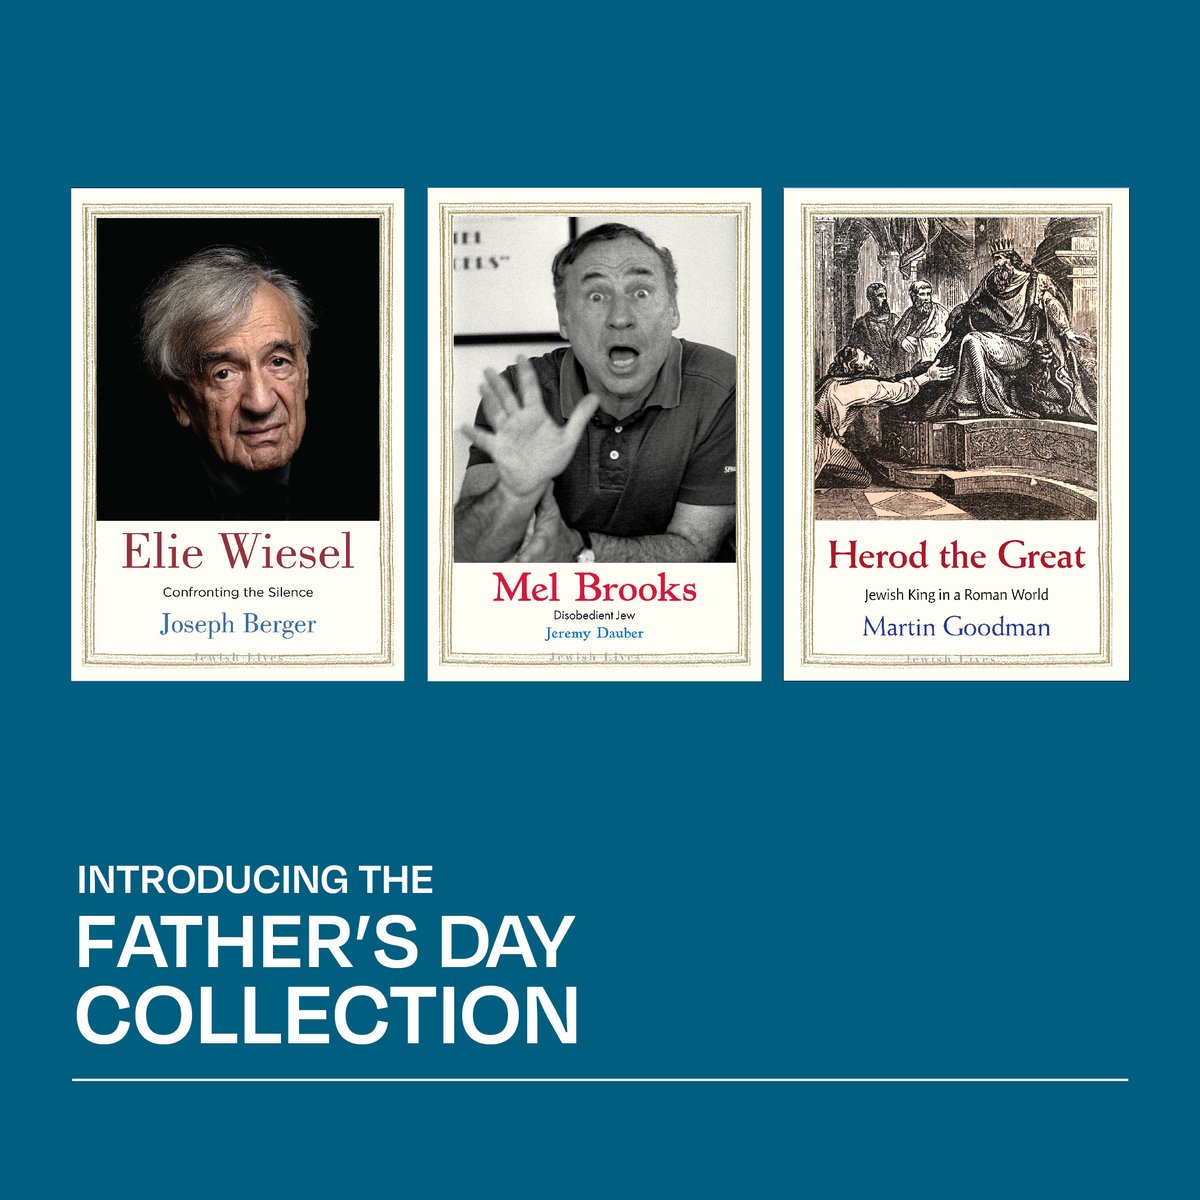 This Father's Day, give the gift of Jewish Lives with biographies of three larger-than-life legends. Available only at jewishlives.org/collections/fa…